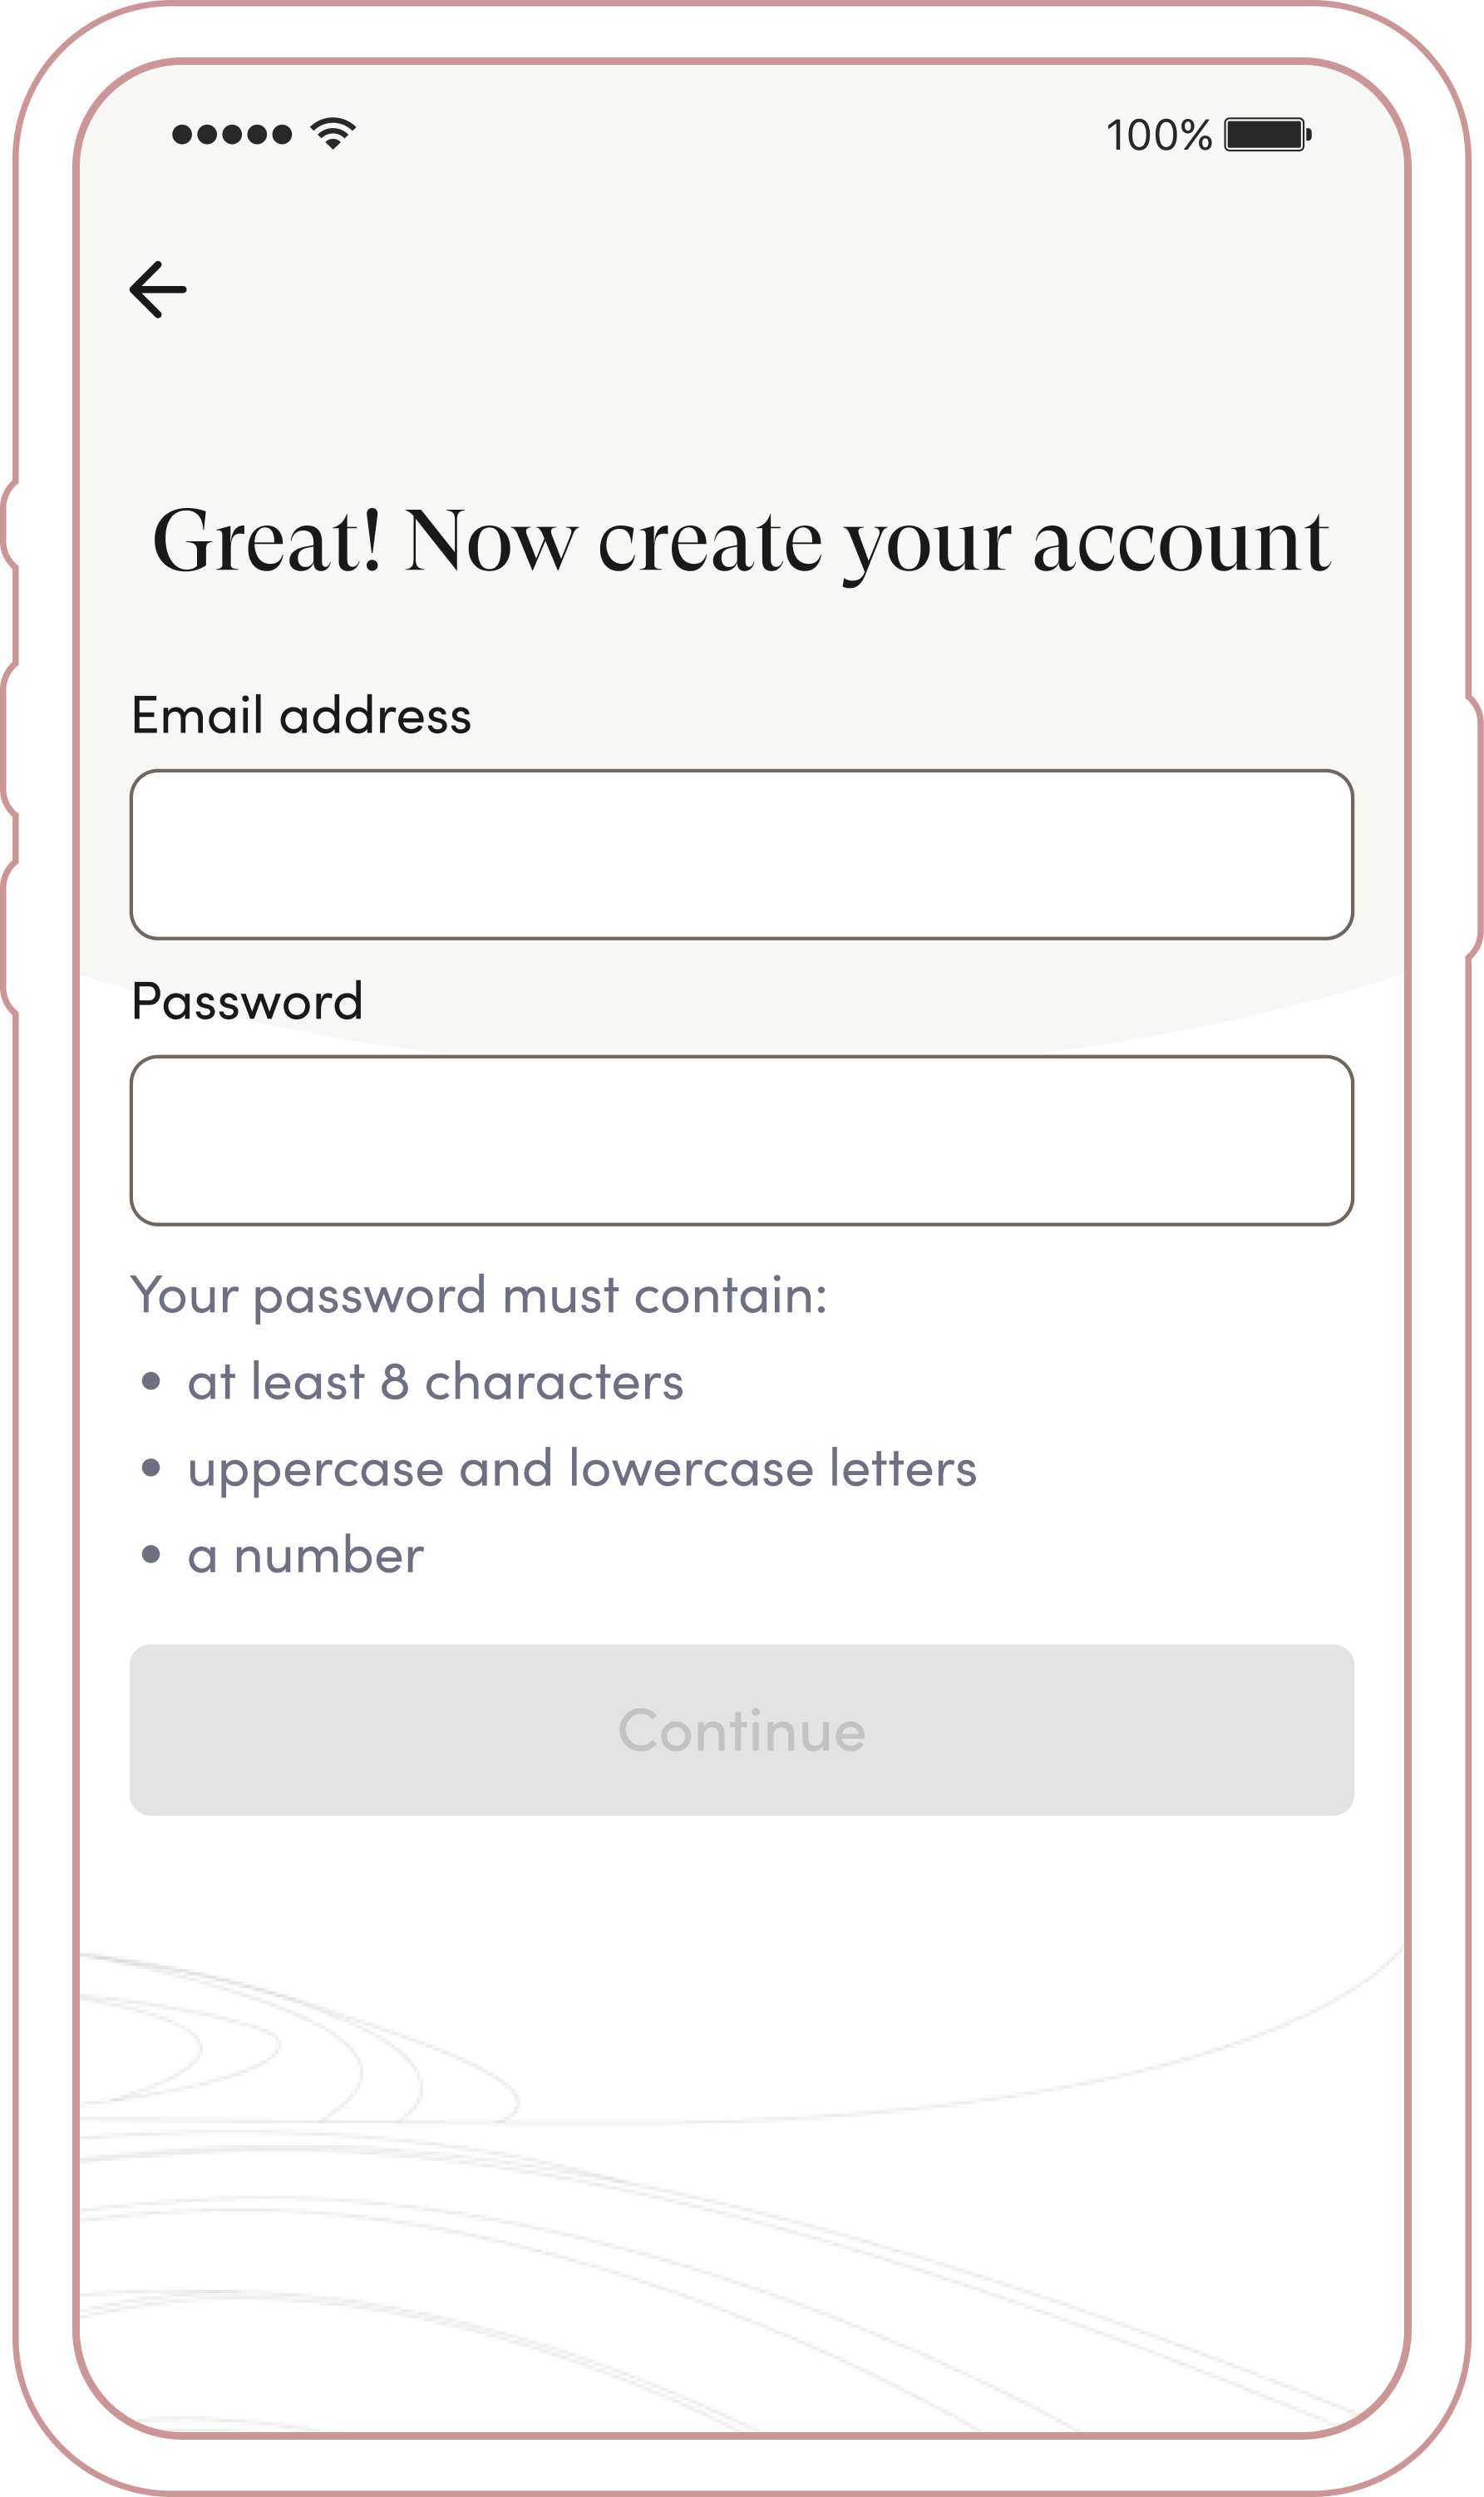 Reset Password screen for Account Creation in the Cedars-Sinai Connect app